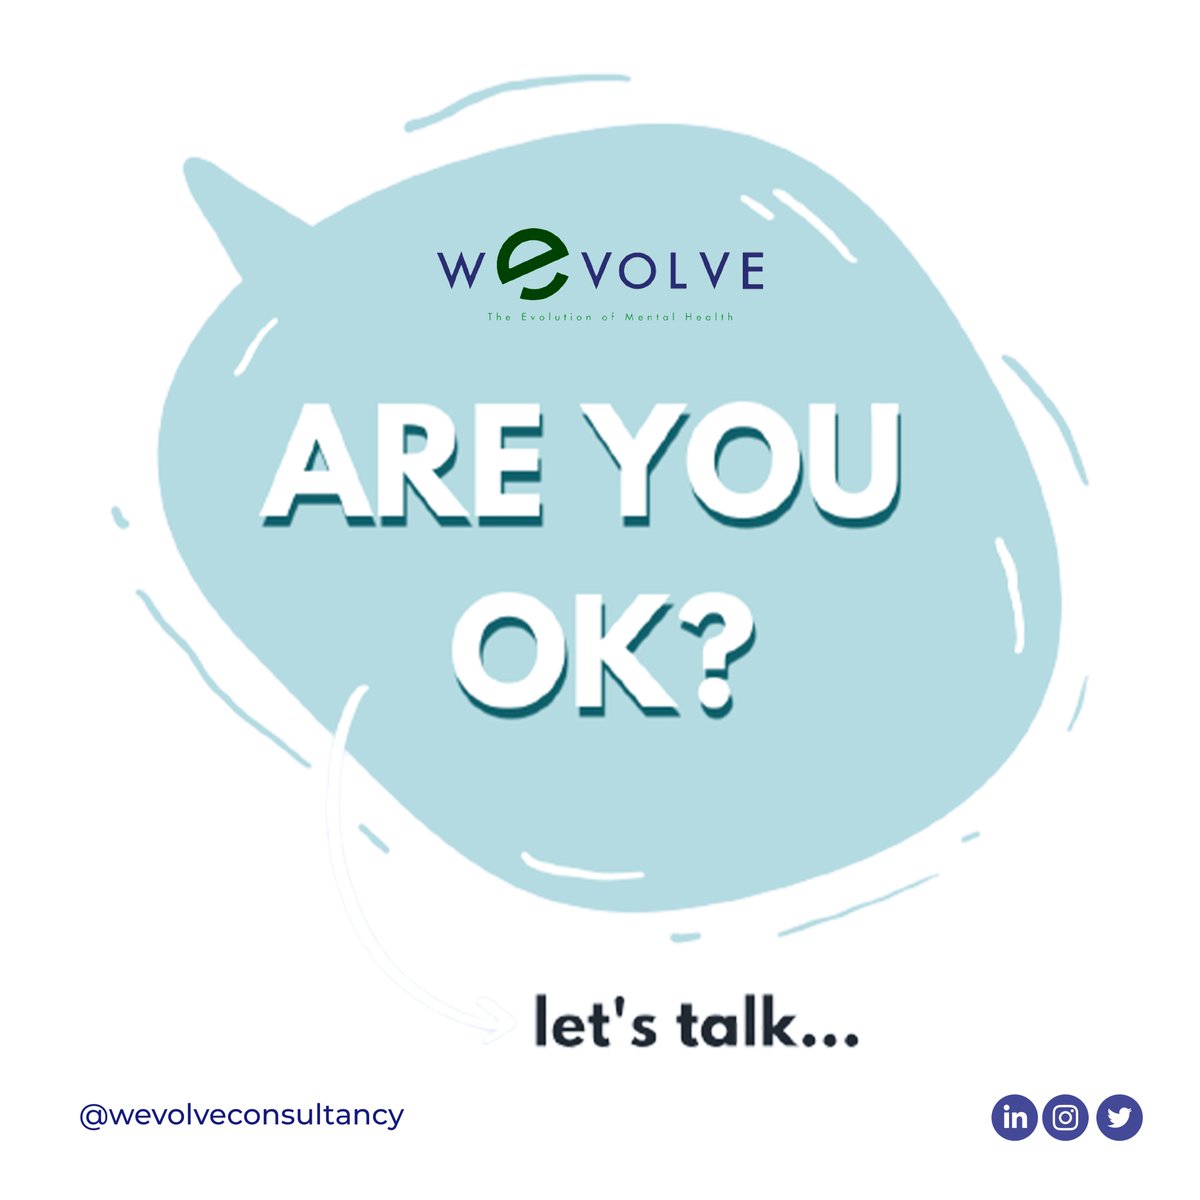 Are you ok? If so, that's great—but if not, please don't keep your struggles to yourself. Reach out to us.
#MentalHealthCheck #MentalHealthAwarenessMonth #MentalHealthMatters #EndTheStigma #emotionalwellbeing #psychologist #counseling #psychotherapy #journeytowellness #selflove